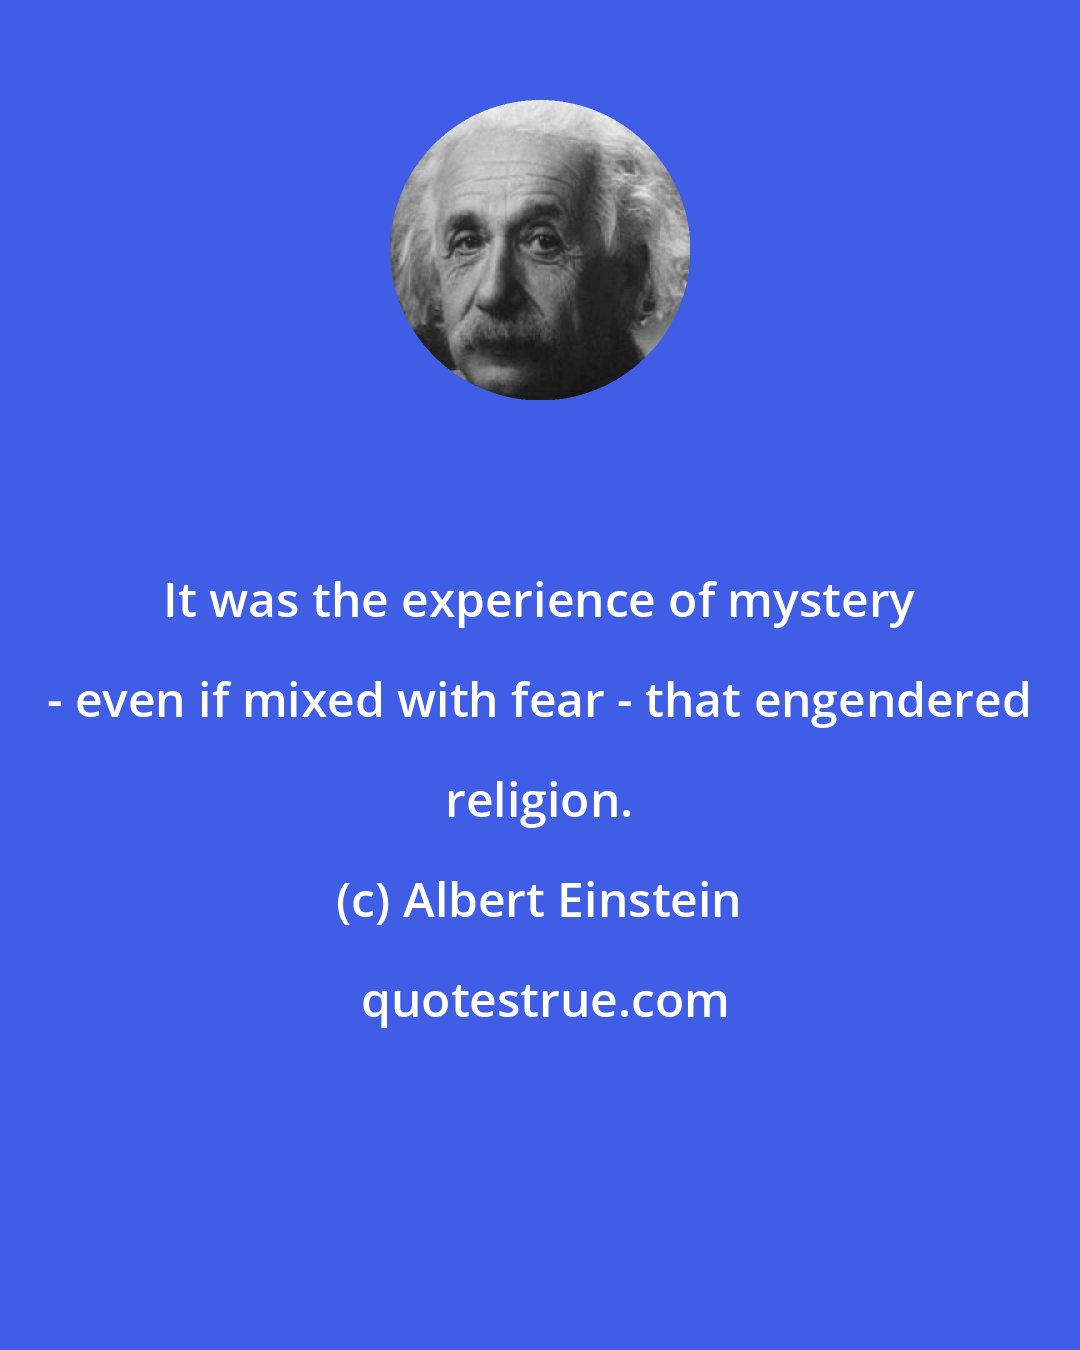 Albert Einstein: It was the experience of mystery - even if mixed with fear - that engendered religion.